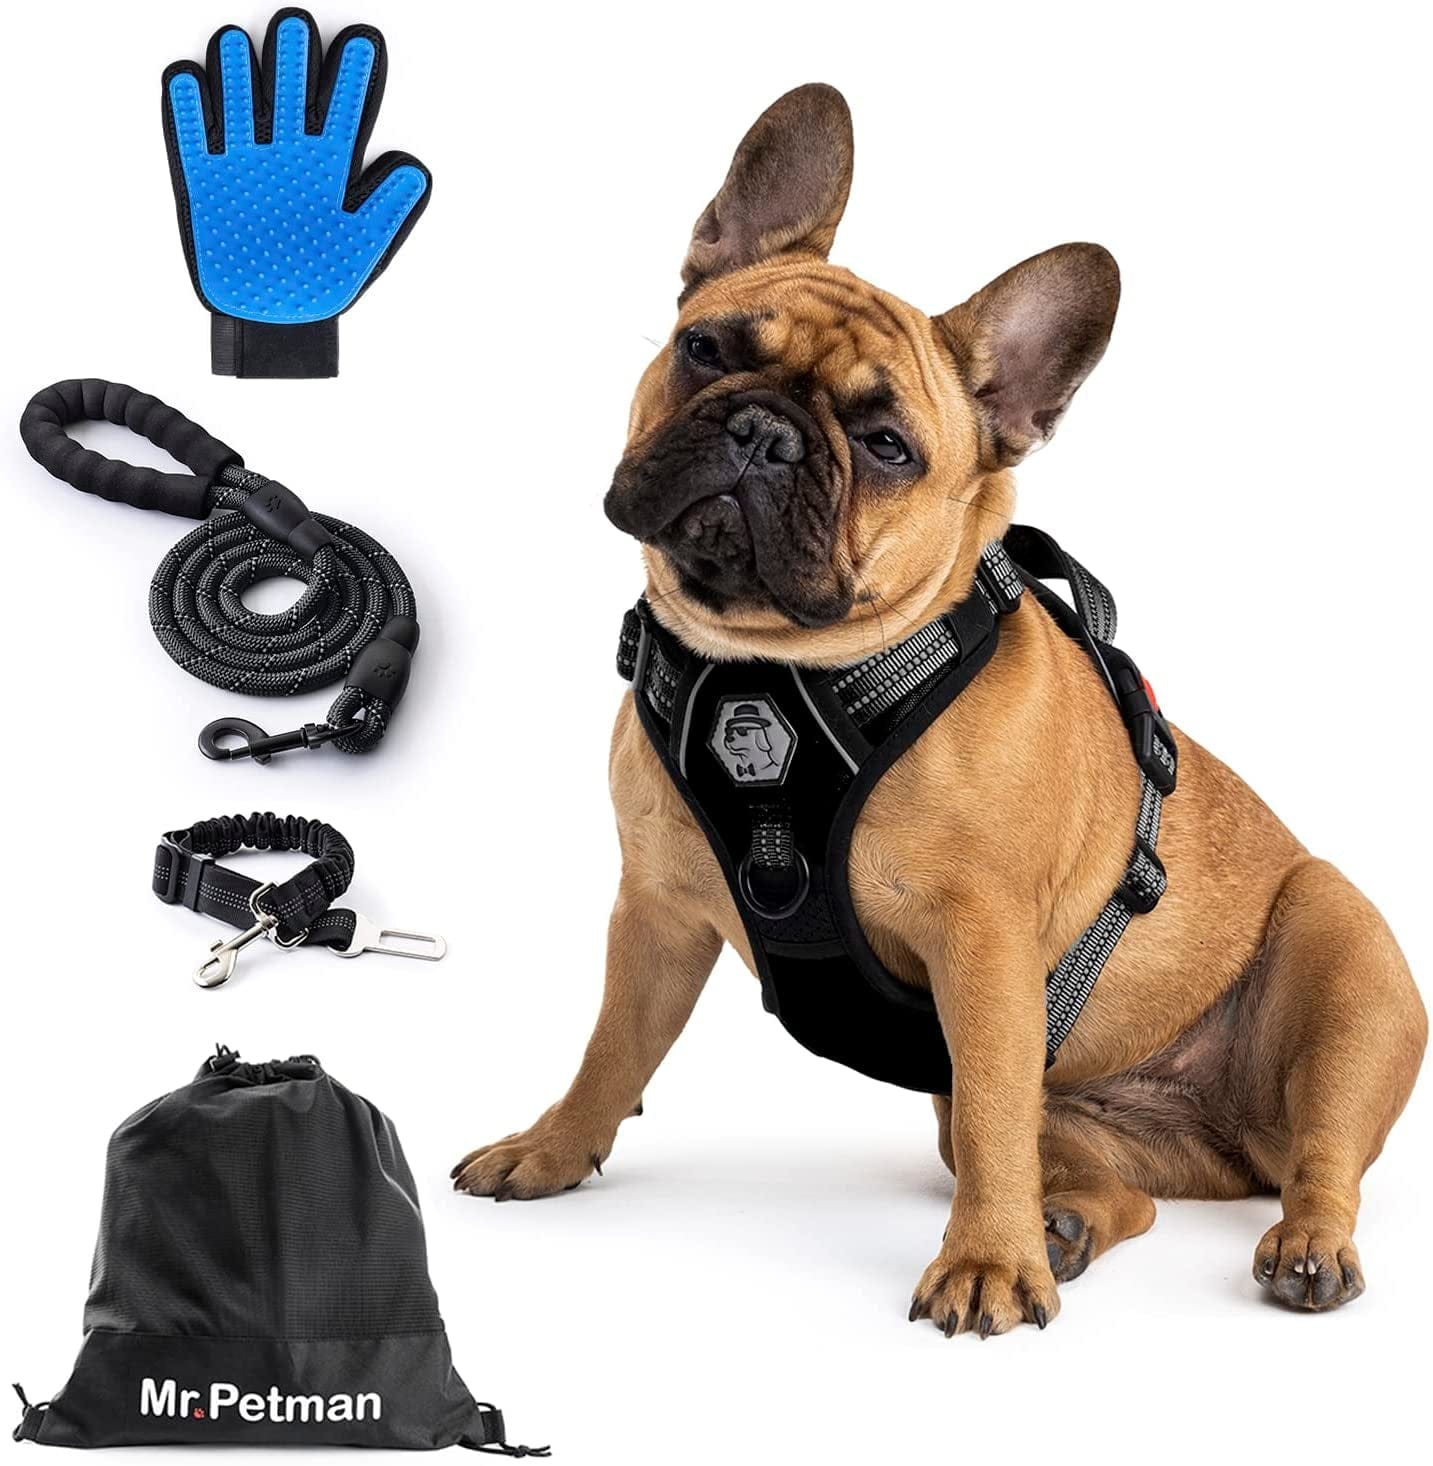 MR. PETMAN No Pull Dog Harness with Leash, Seat Belt, Grooming Glove - No Choke Dog Harness Set for Small Medium Large Dogs- Reflective Adjustable Dog Vest Harnesses with Handle for Walking Training Animals & Pet Supplies > Pet Supplies > Dog Supplies > Dog Apparel Mr. Petman Classic Black Medium 